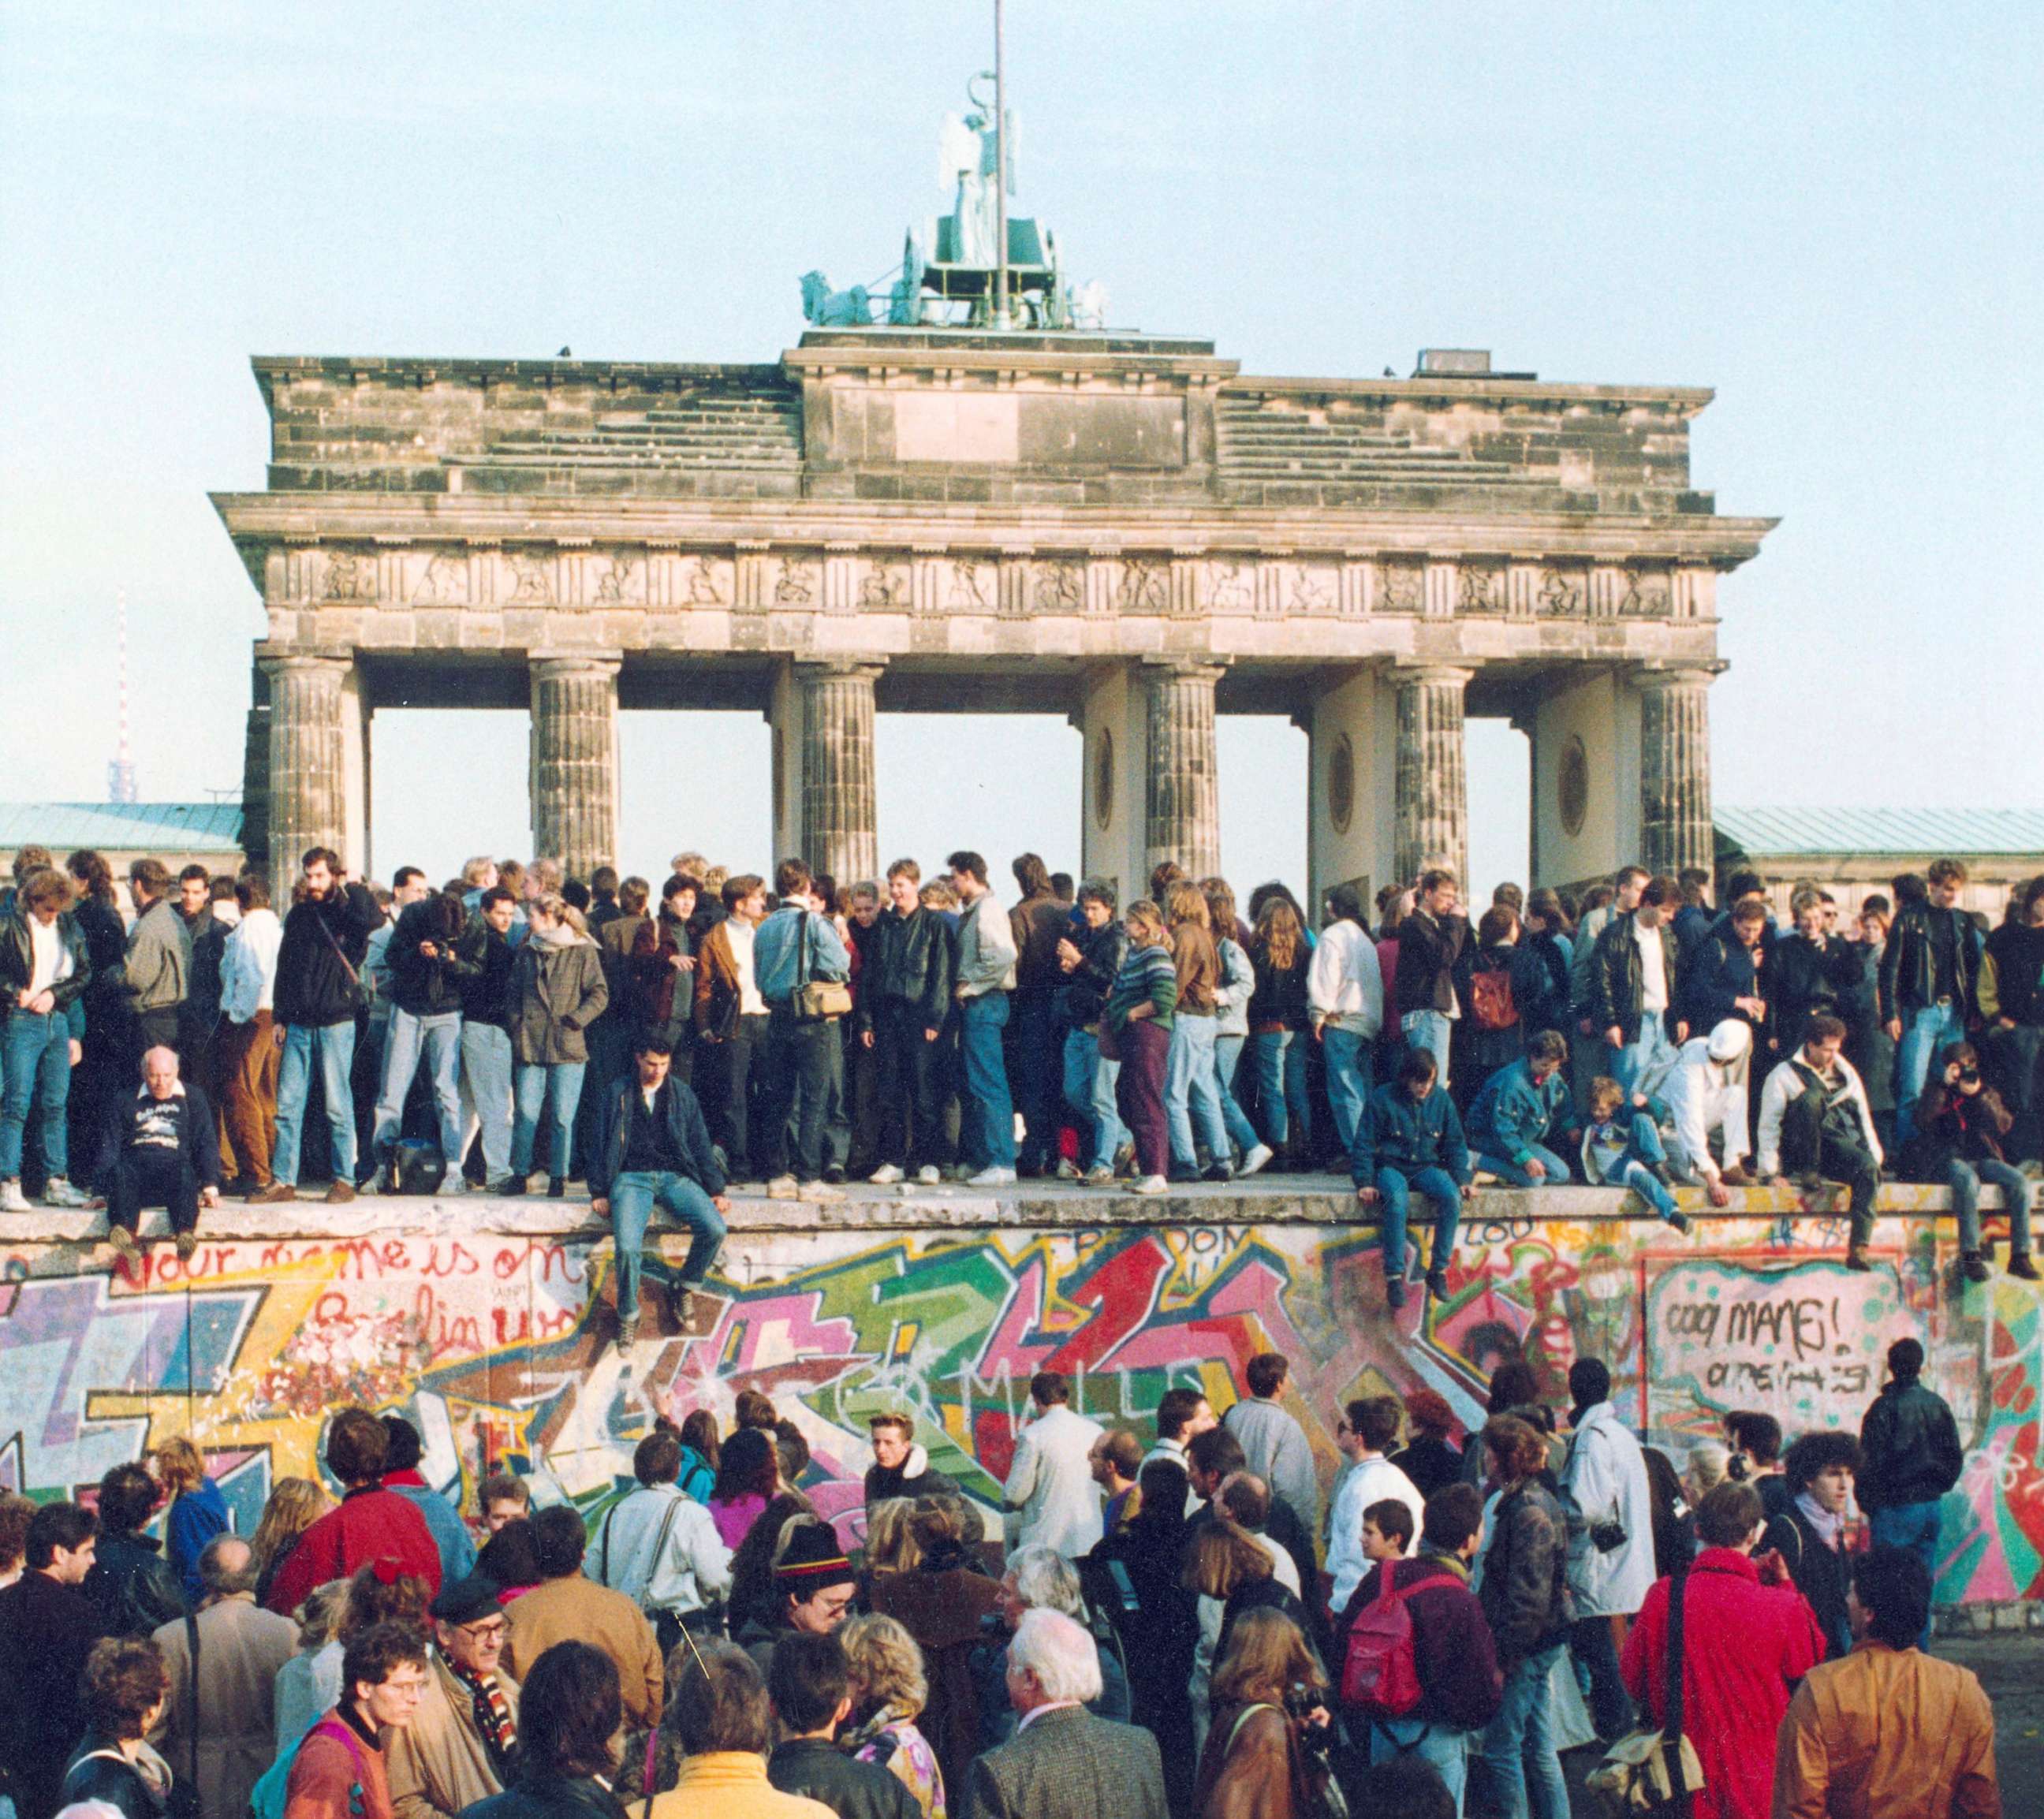 PHOTO: In this Nov. 10, 1989, file photo, Germans from East and West stand on the Berlin Wall in front of the Brandenburg Gate in Berlin.